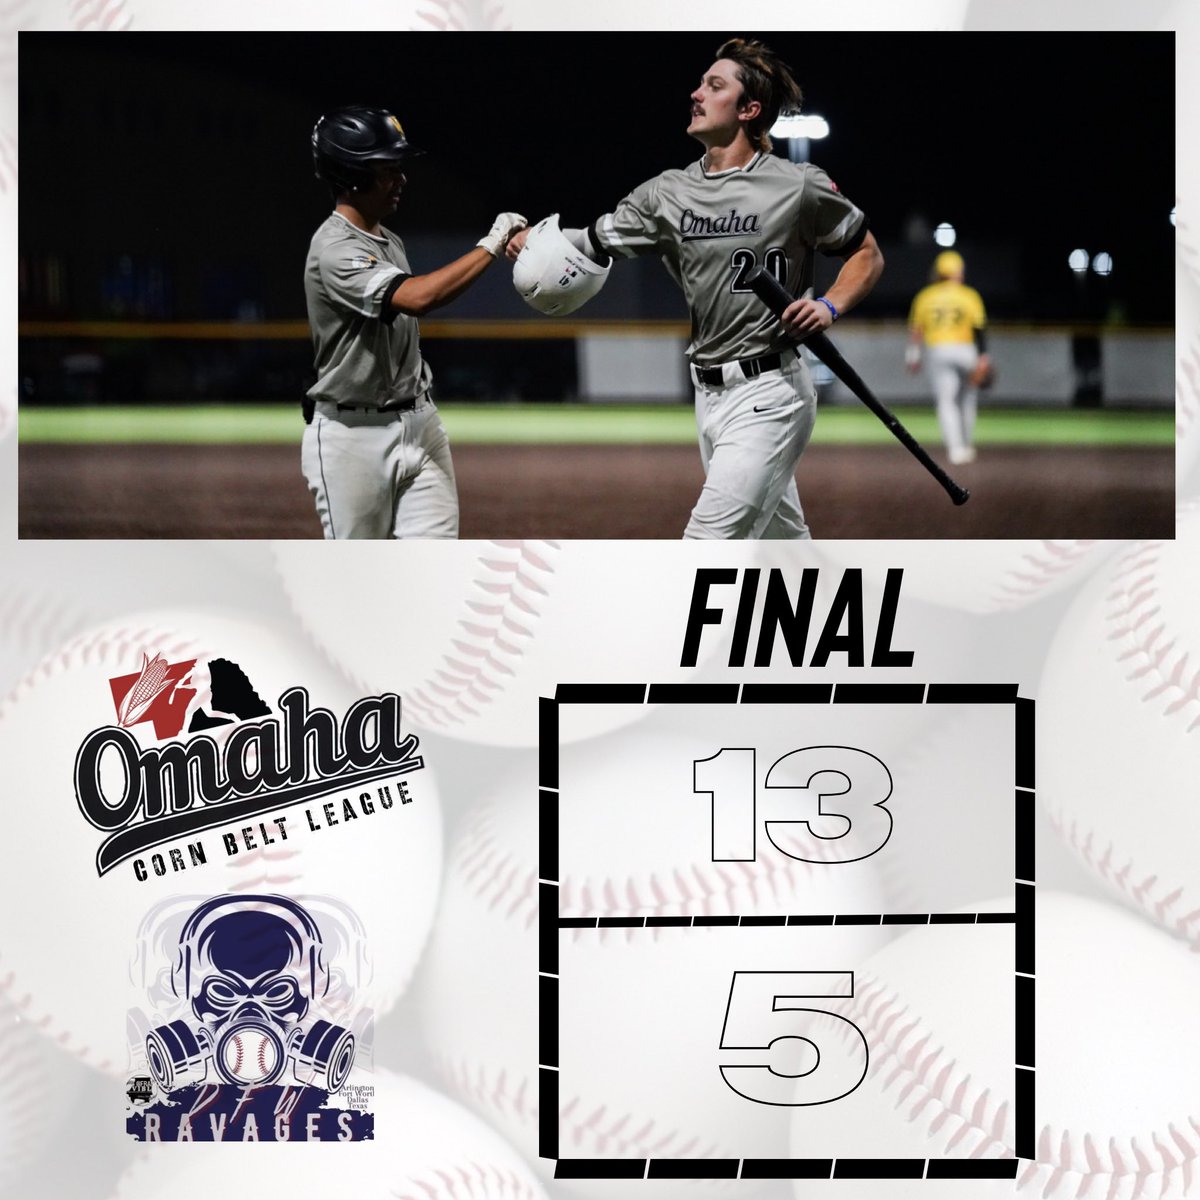 CBL Omaha takes down the Dallas-Fort Worth Ravages 13-5 in tonight’s contest with a couple of big swings. Bracket play begins tomorrow with game times still TBD. Novotny: 5.2IP, 8K Burnett: 2-3, Solo HR Rivers: 1-1, Solo HR Madsen: 3-3, 2B, 1 RBI